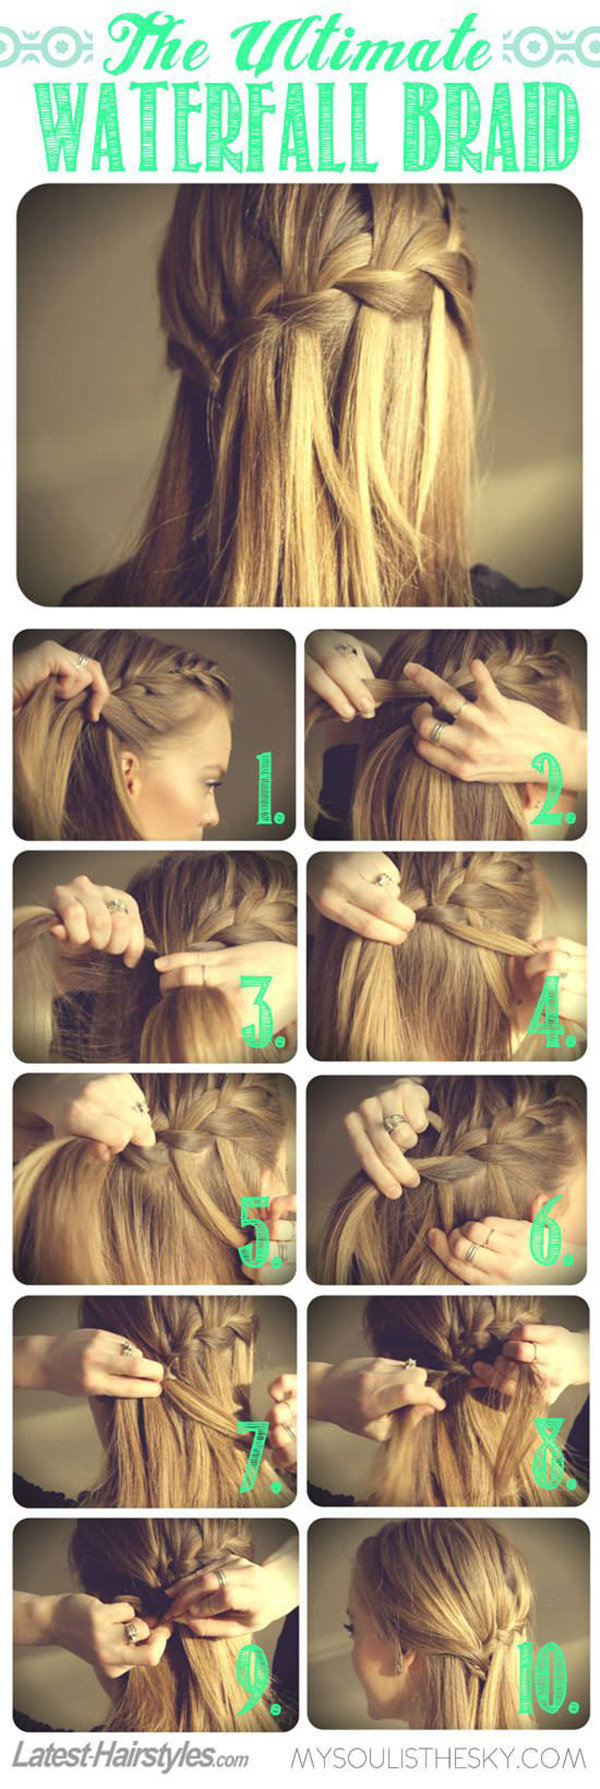 Easy Do It Yourself Hairstyles